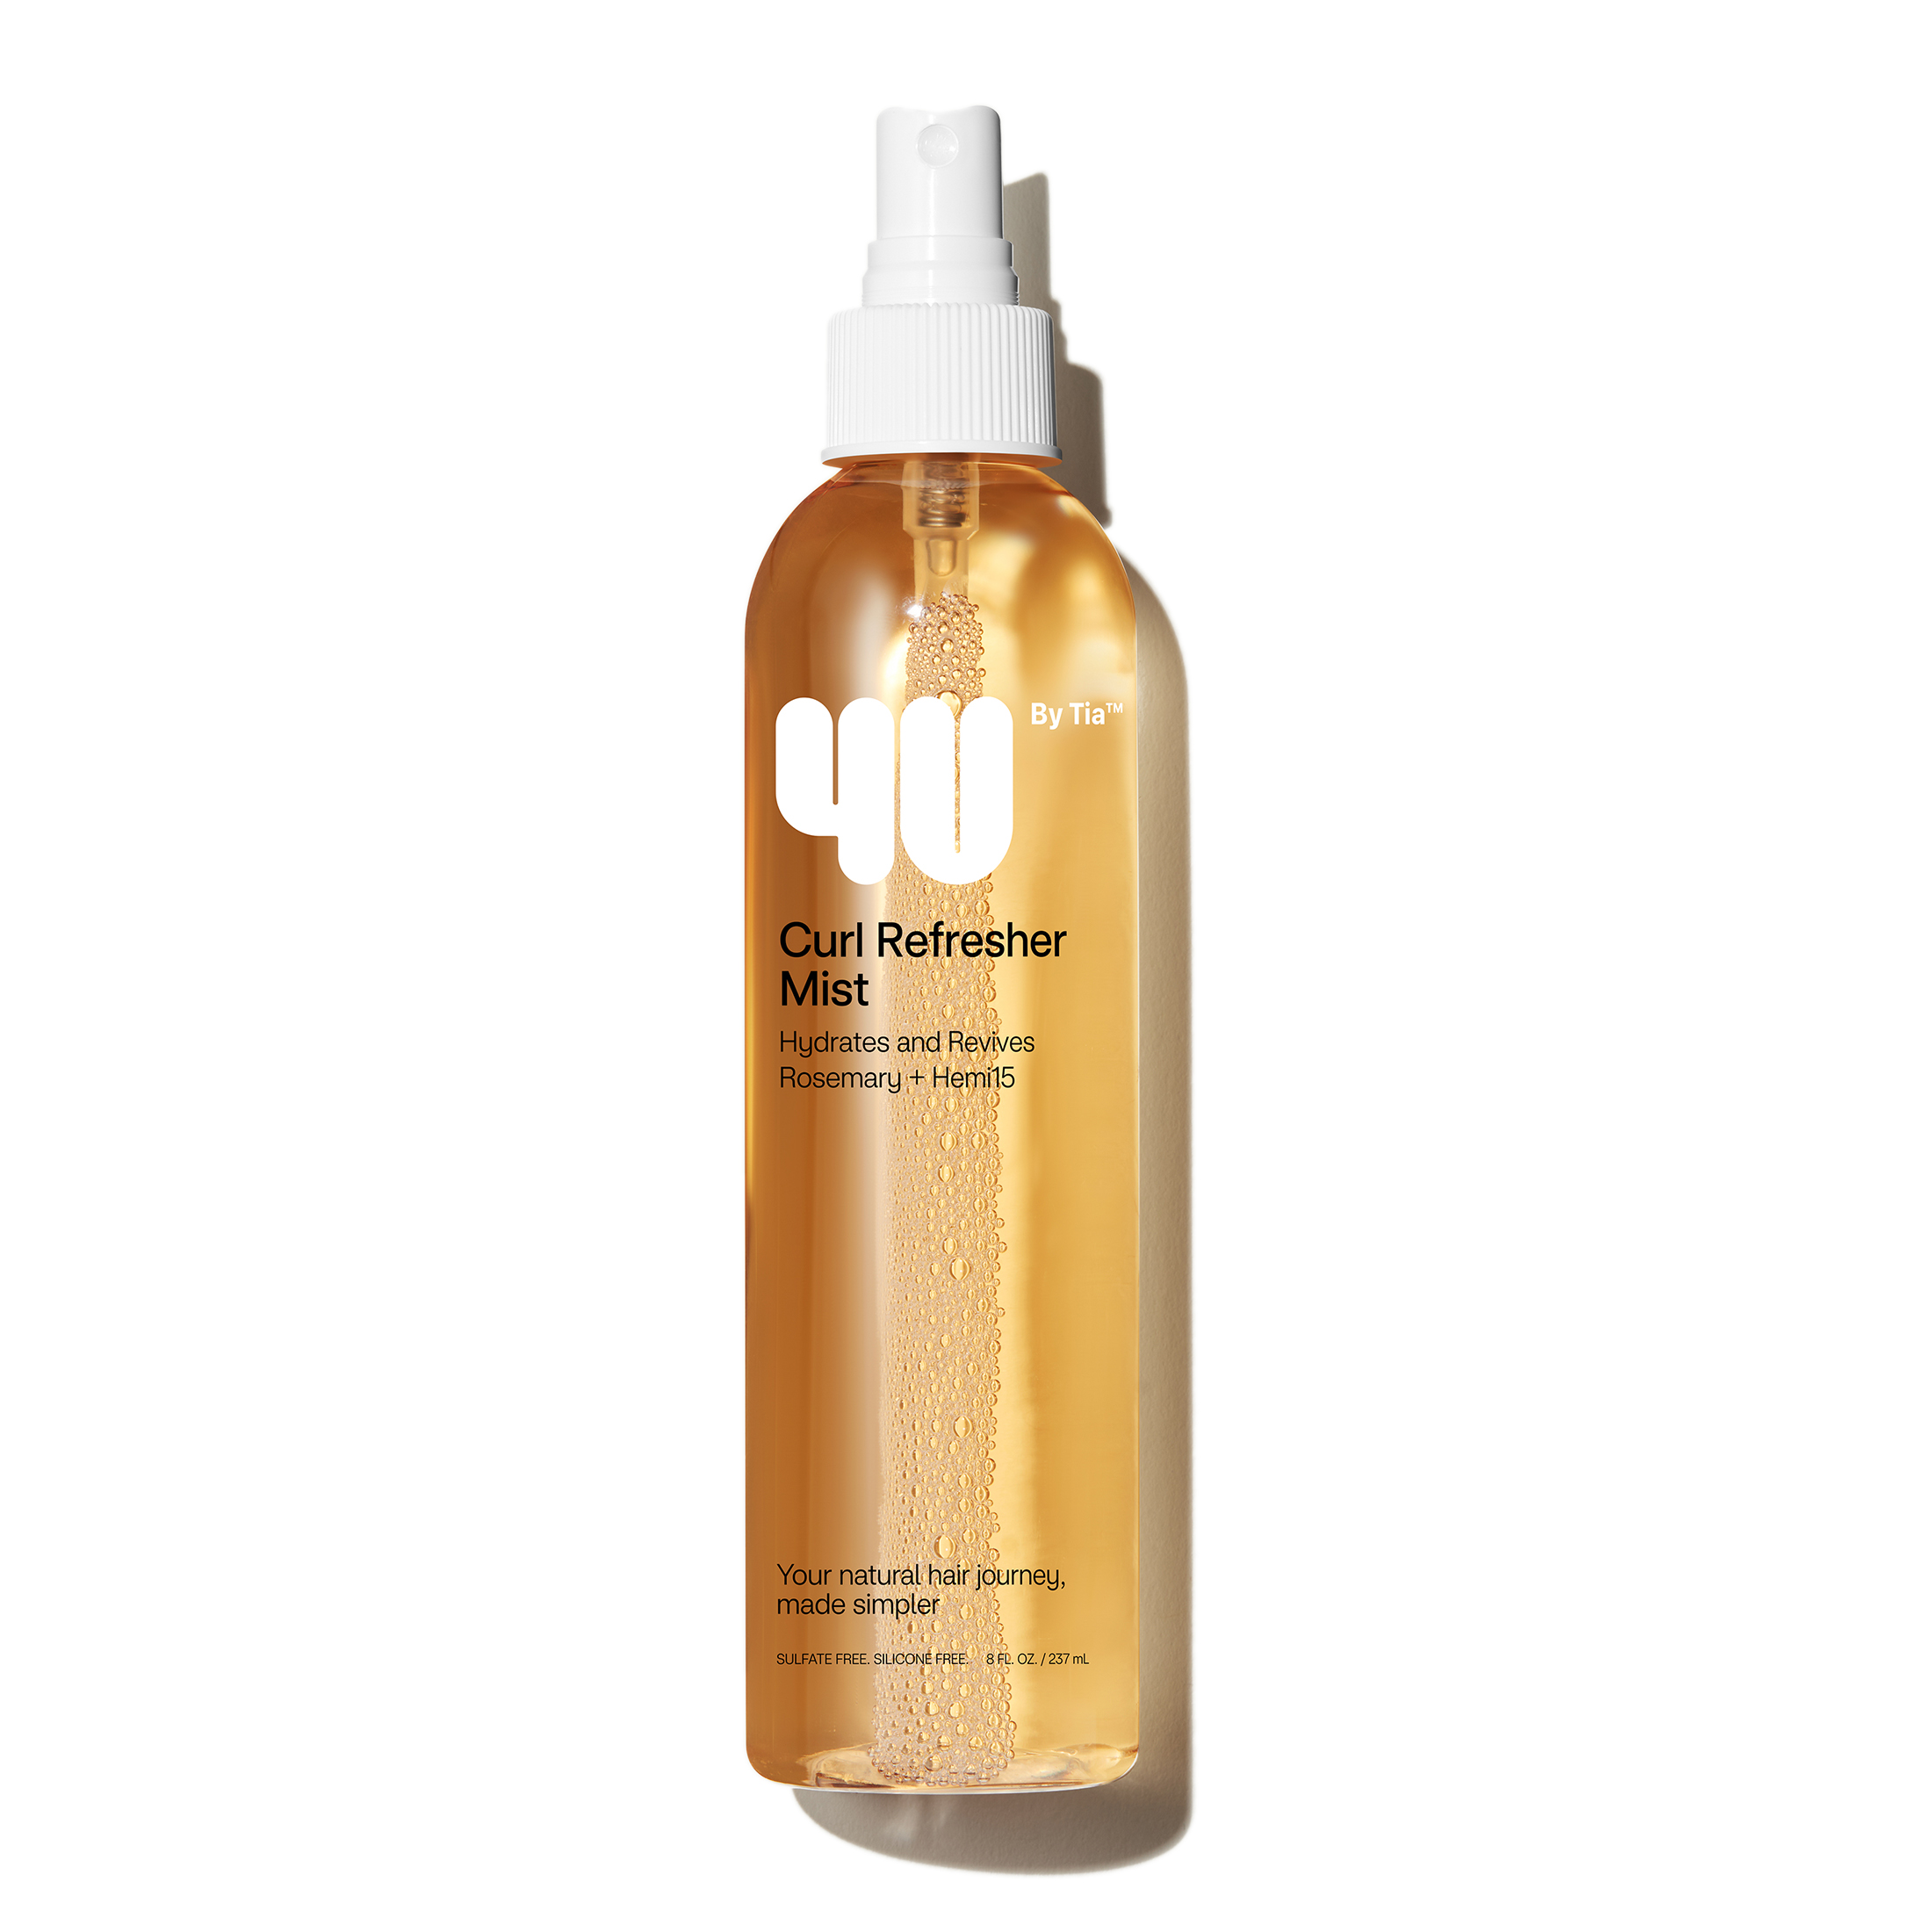 4U by Tia Curl Refresher Mist Hair Spray with Rosemary, 8 fl oz - image 1 of 11